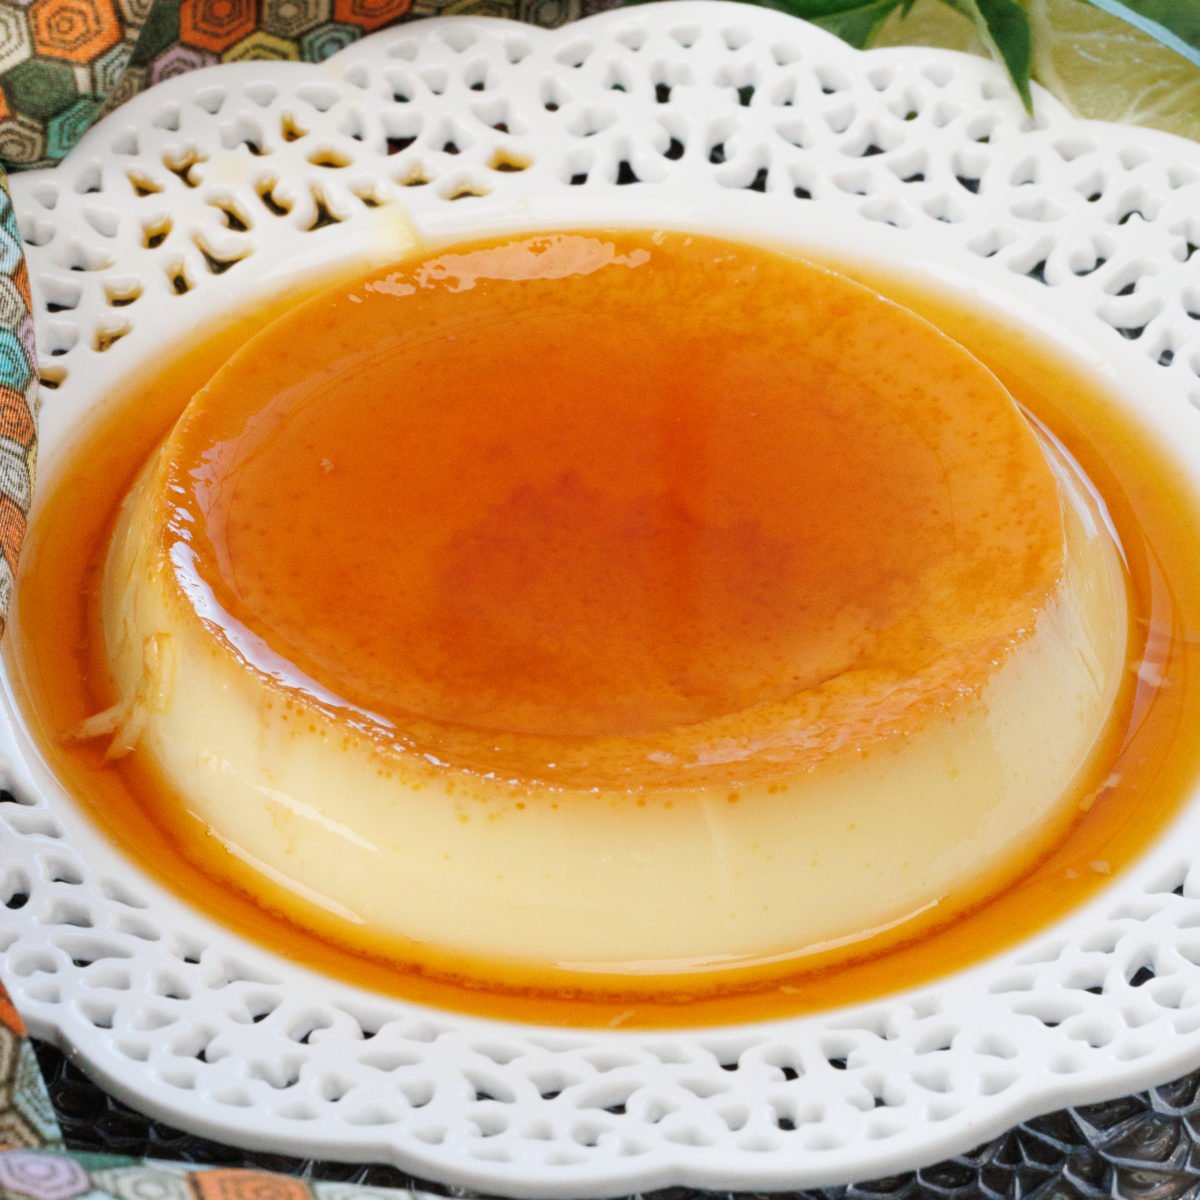 one flan on a lace plate.